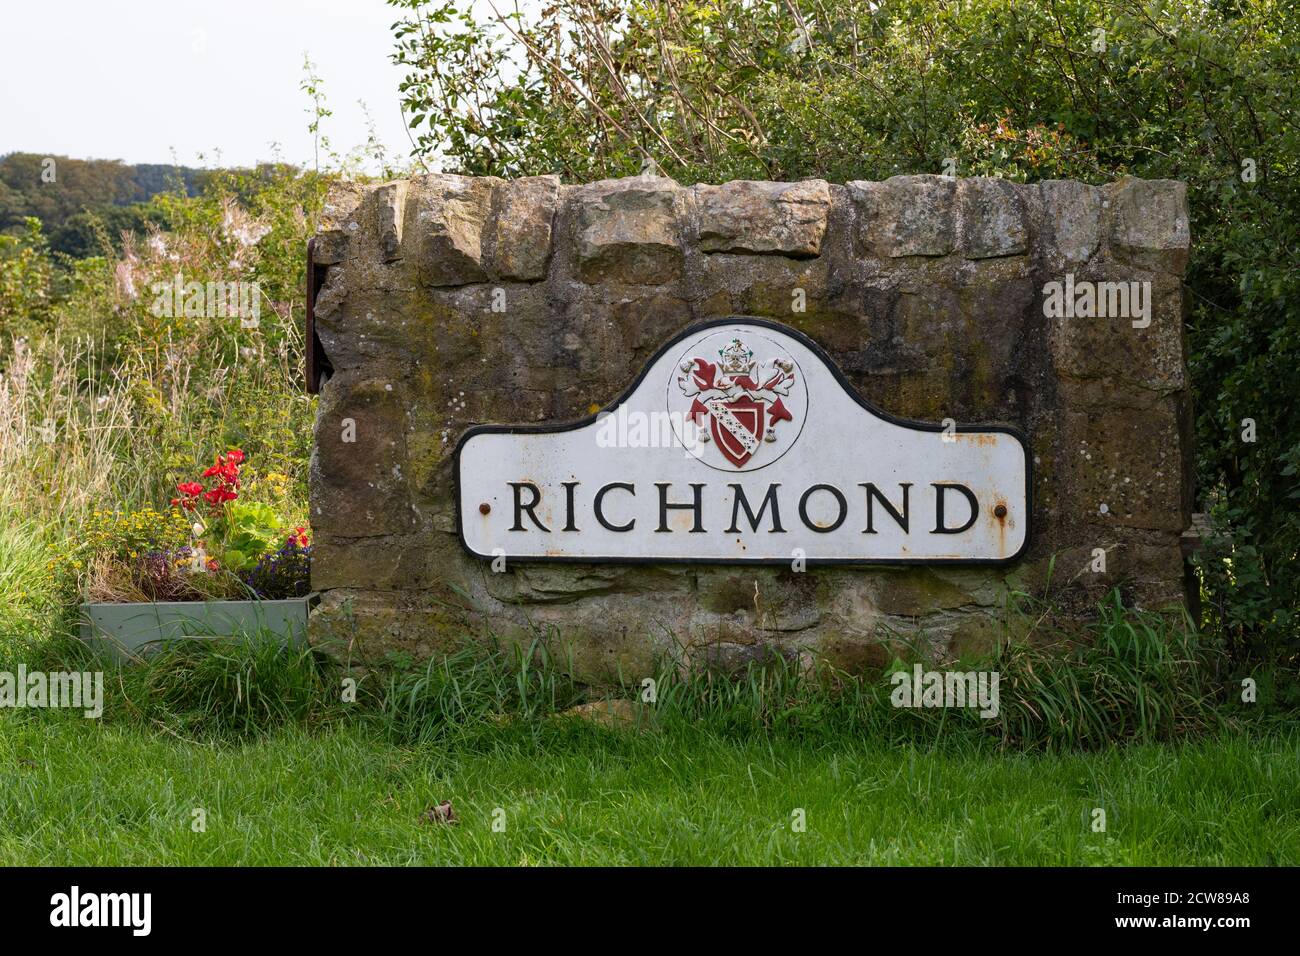 Richmond, North Yorkshire town sign and coat of arms, England, UK Stock Photo